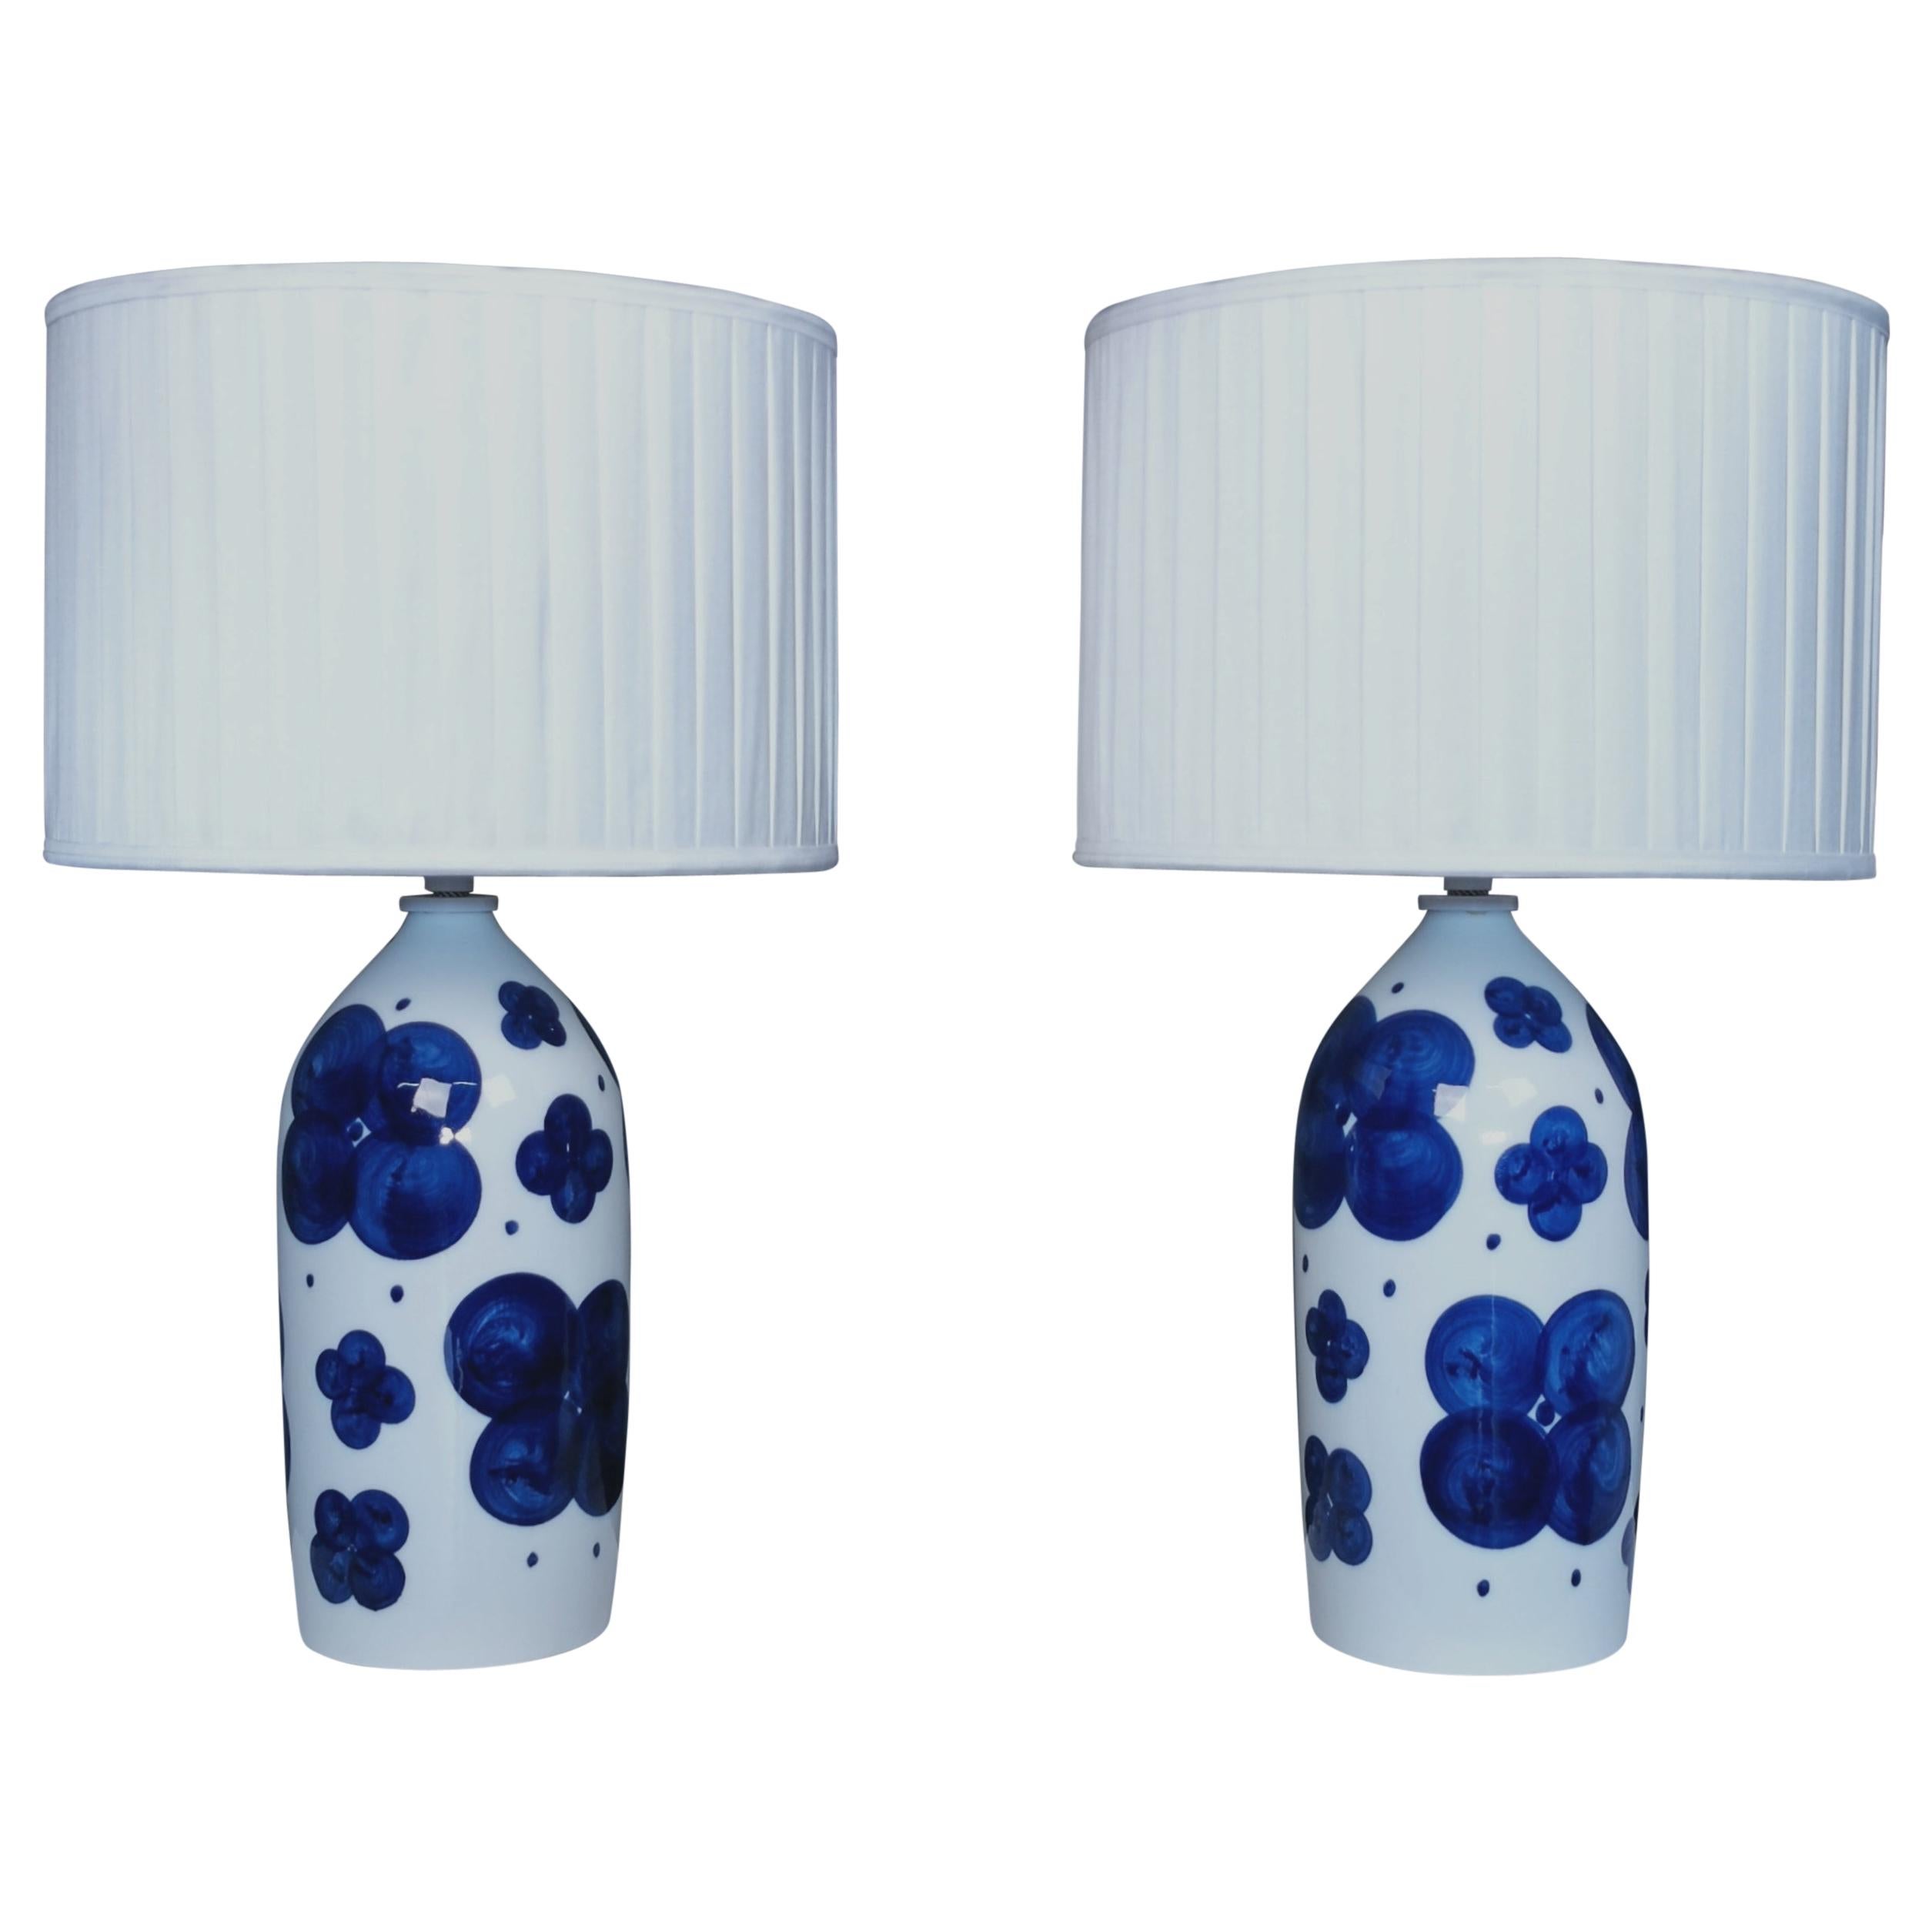 Pair of Glazed Ceramic Table Lamps by Sylvia Leuchovius, Sweden, 1960s